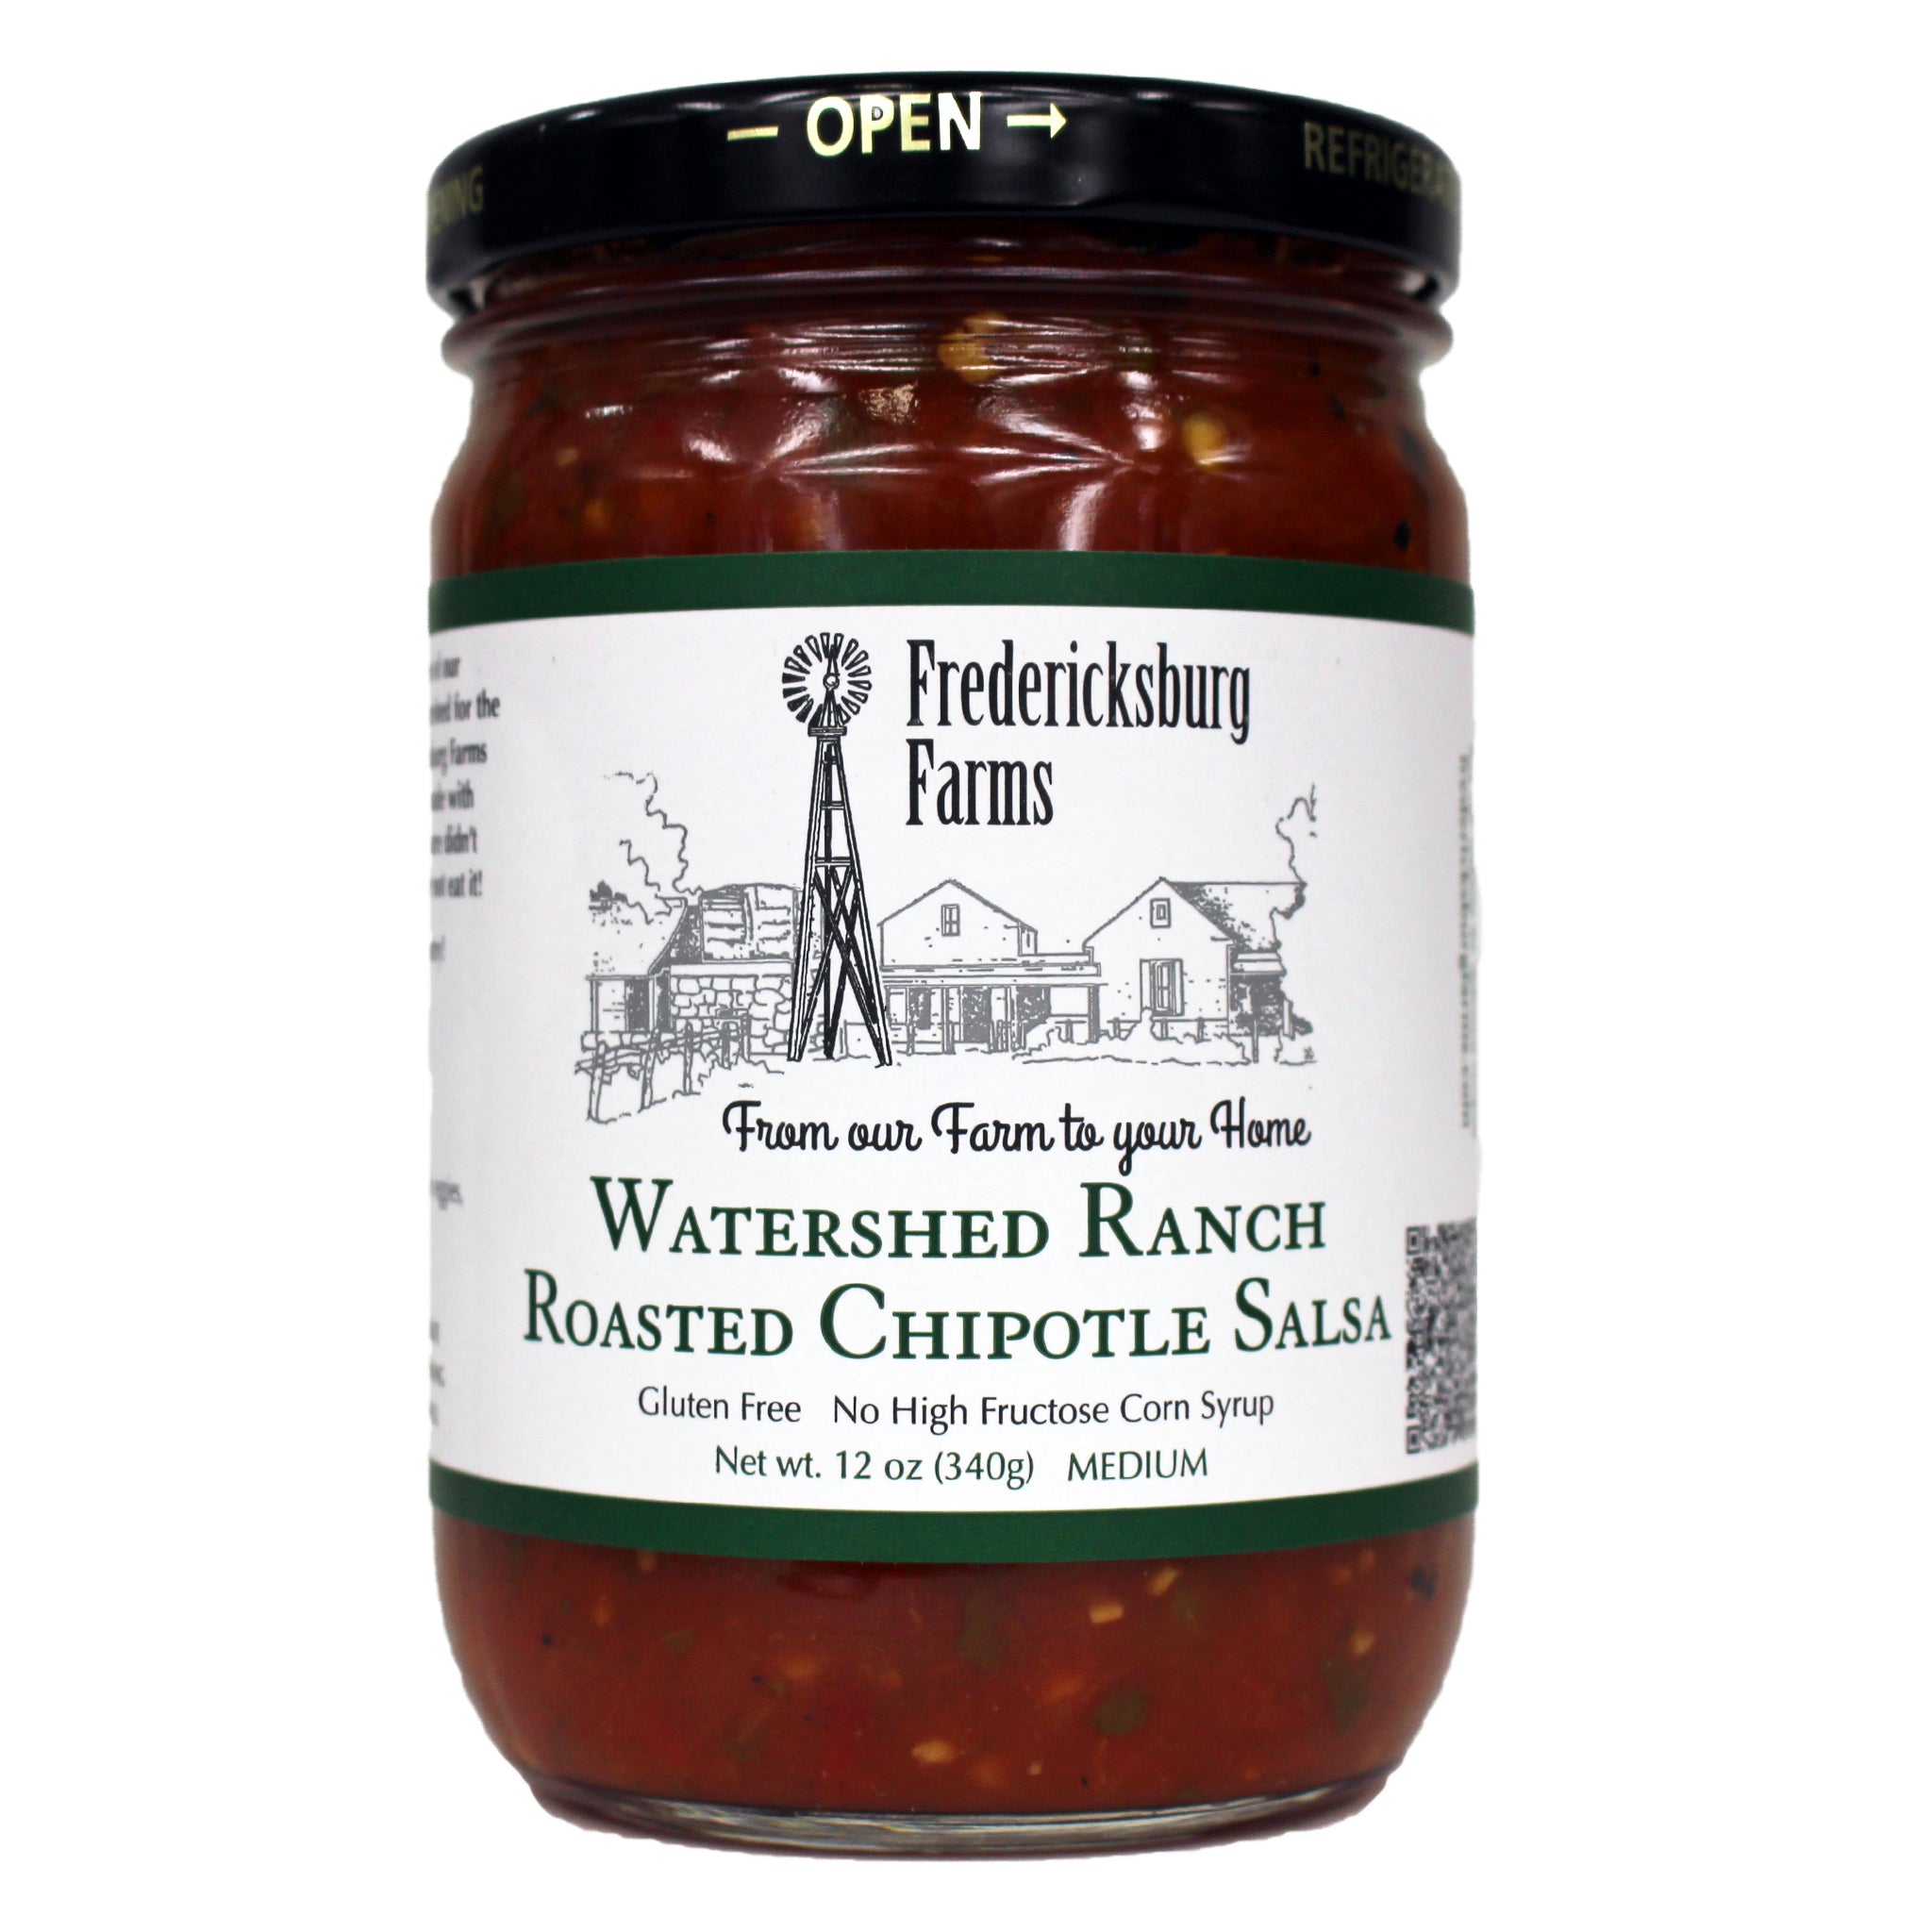 Watershed Ranch Roasted Chipotle Salsa - Fredericksburg Farms